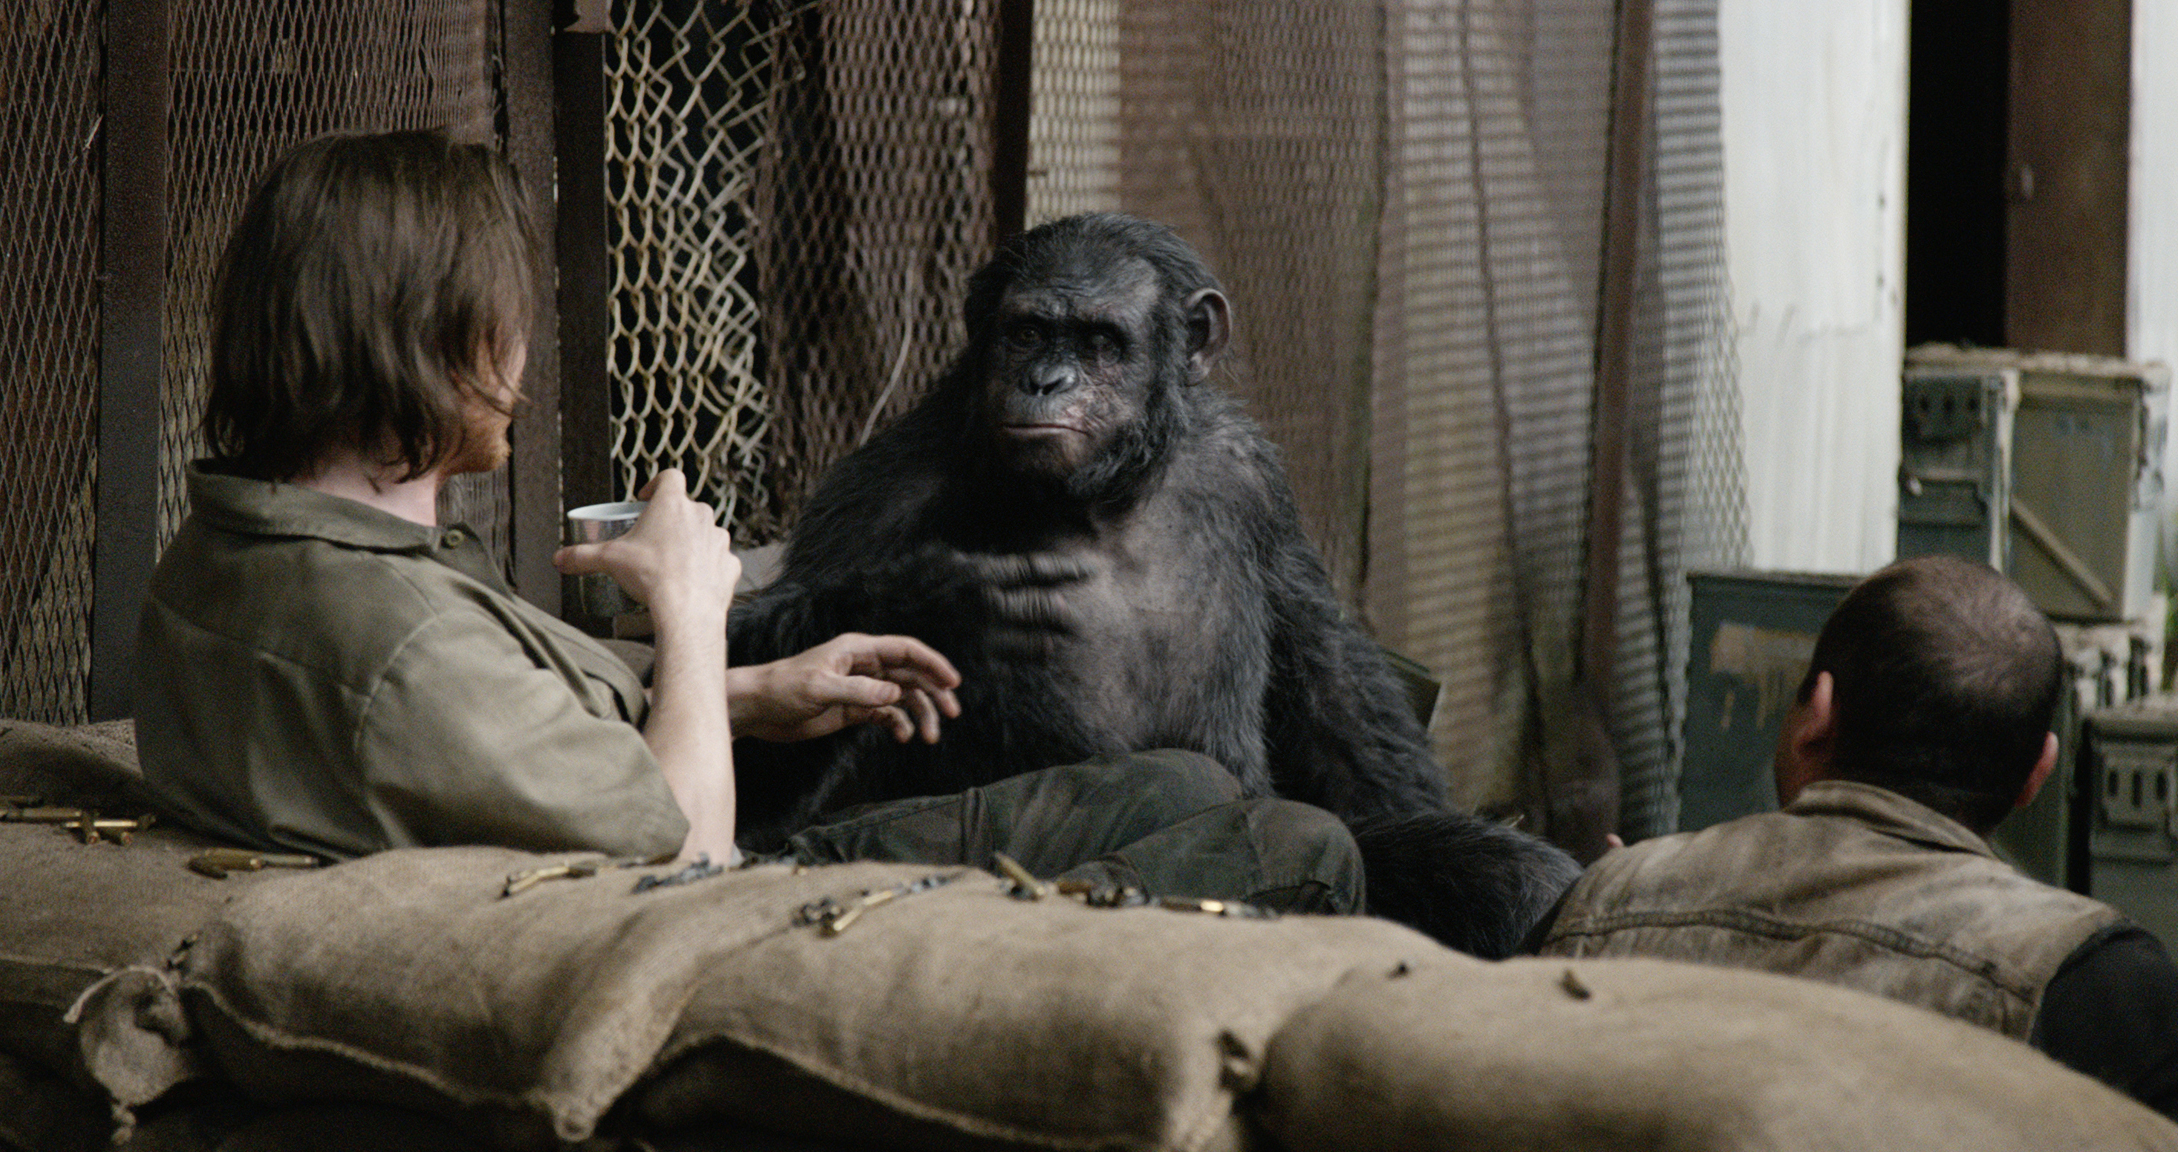 EPIC “DAWN” CONTINUES STUNNING “APES” RESURGENCE